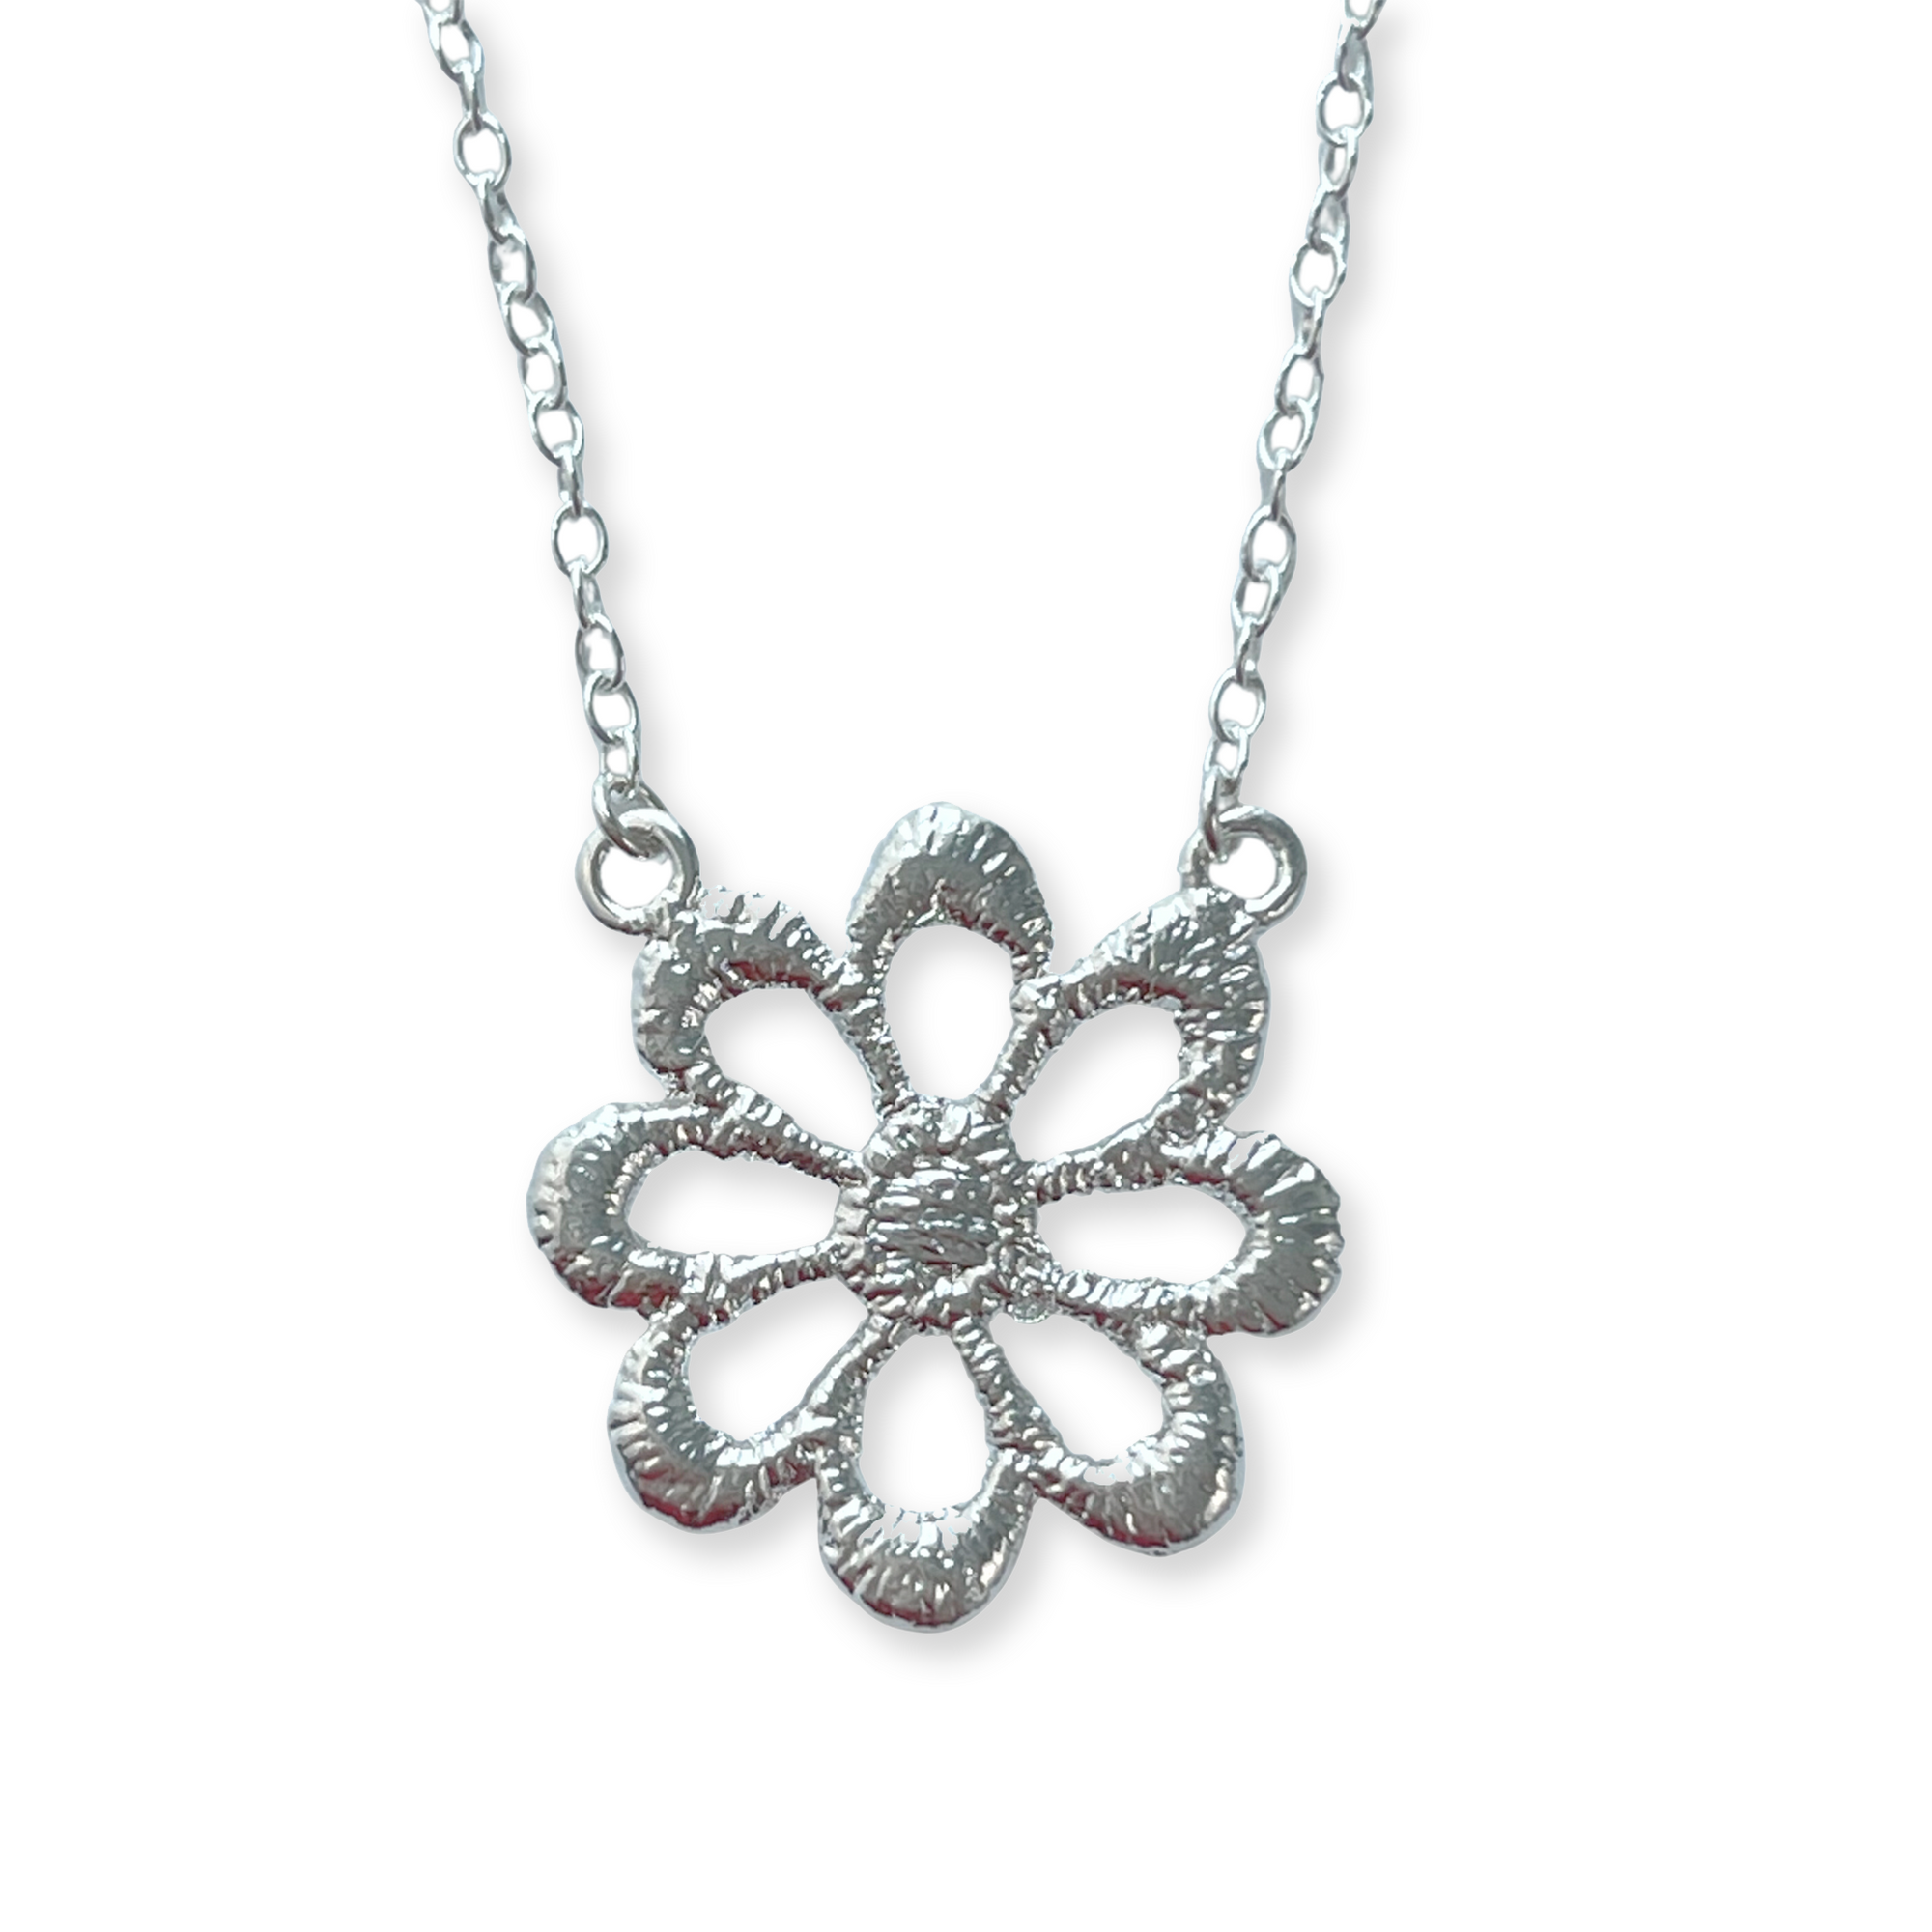 Lace flower necklace in sterling silver.